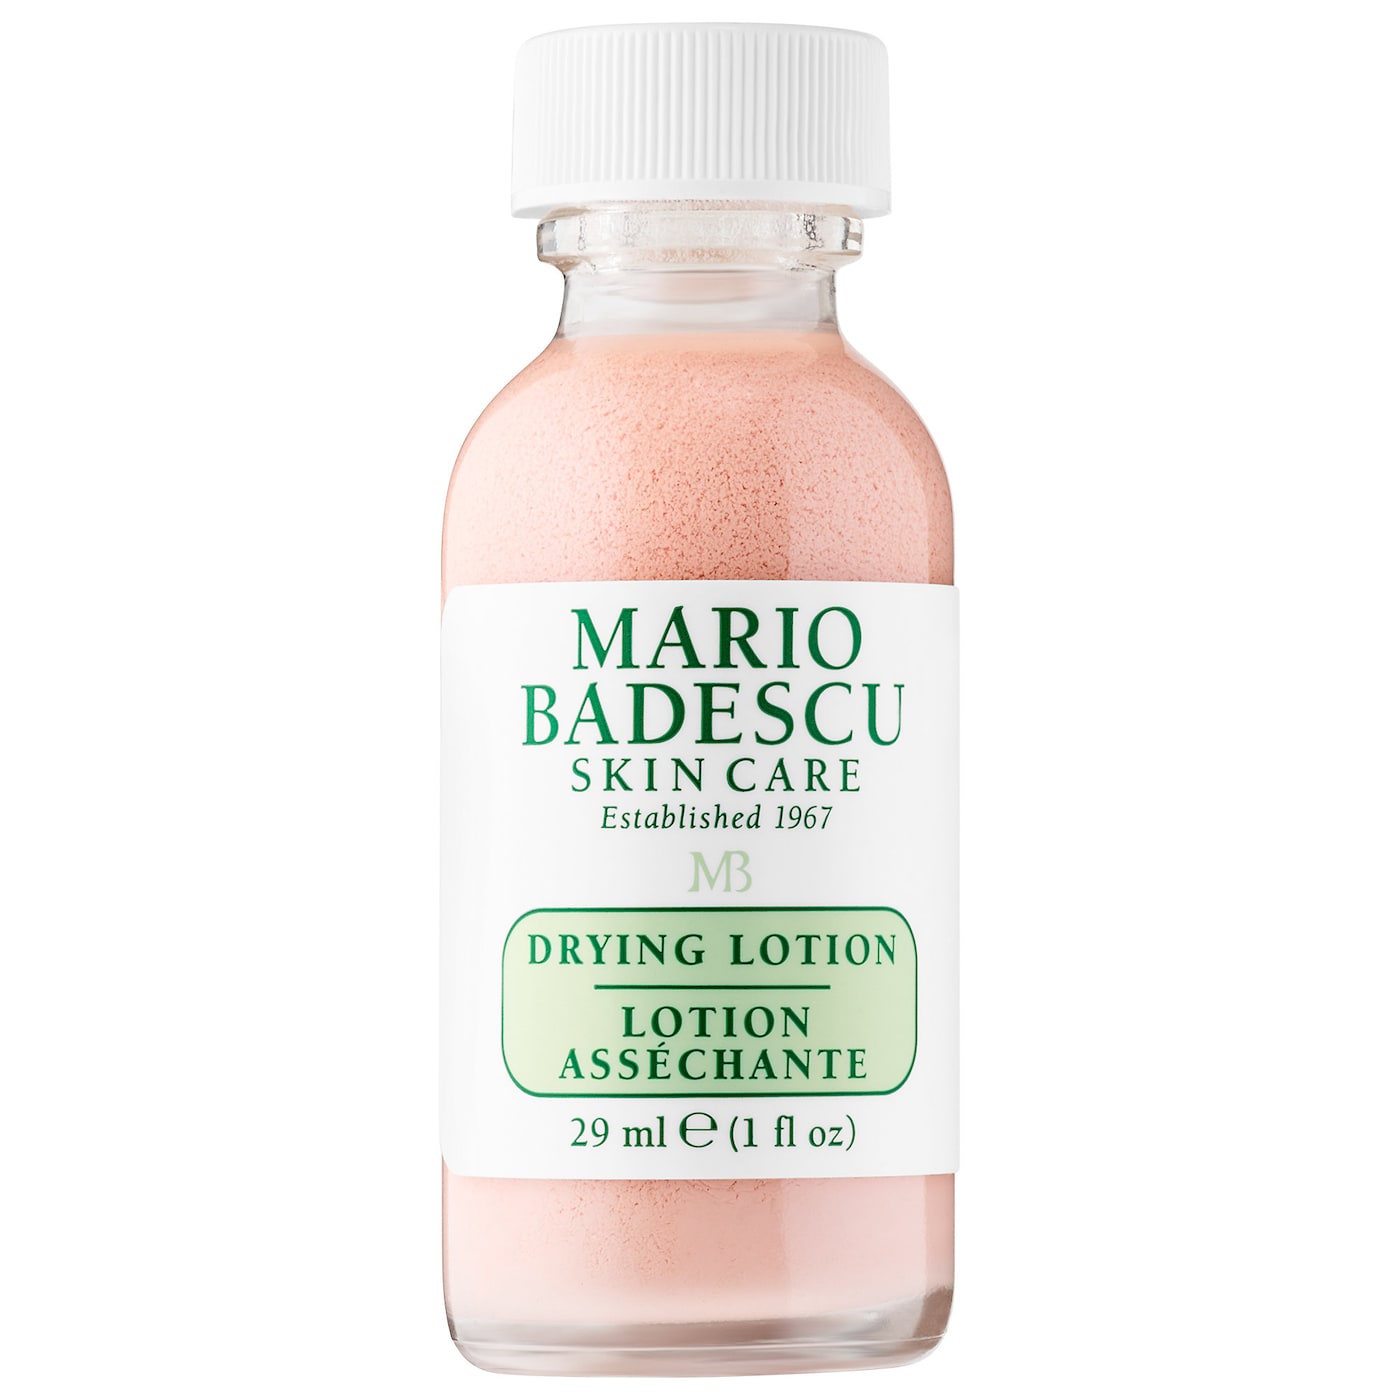 Hysterisk justering godkende MARIO BADESCU - Drying Lotion | Give Me Glam - Cosmetics Shop Lebanon